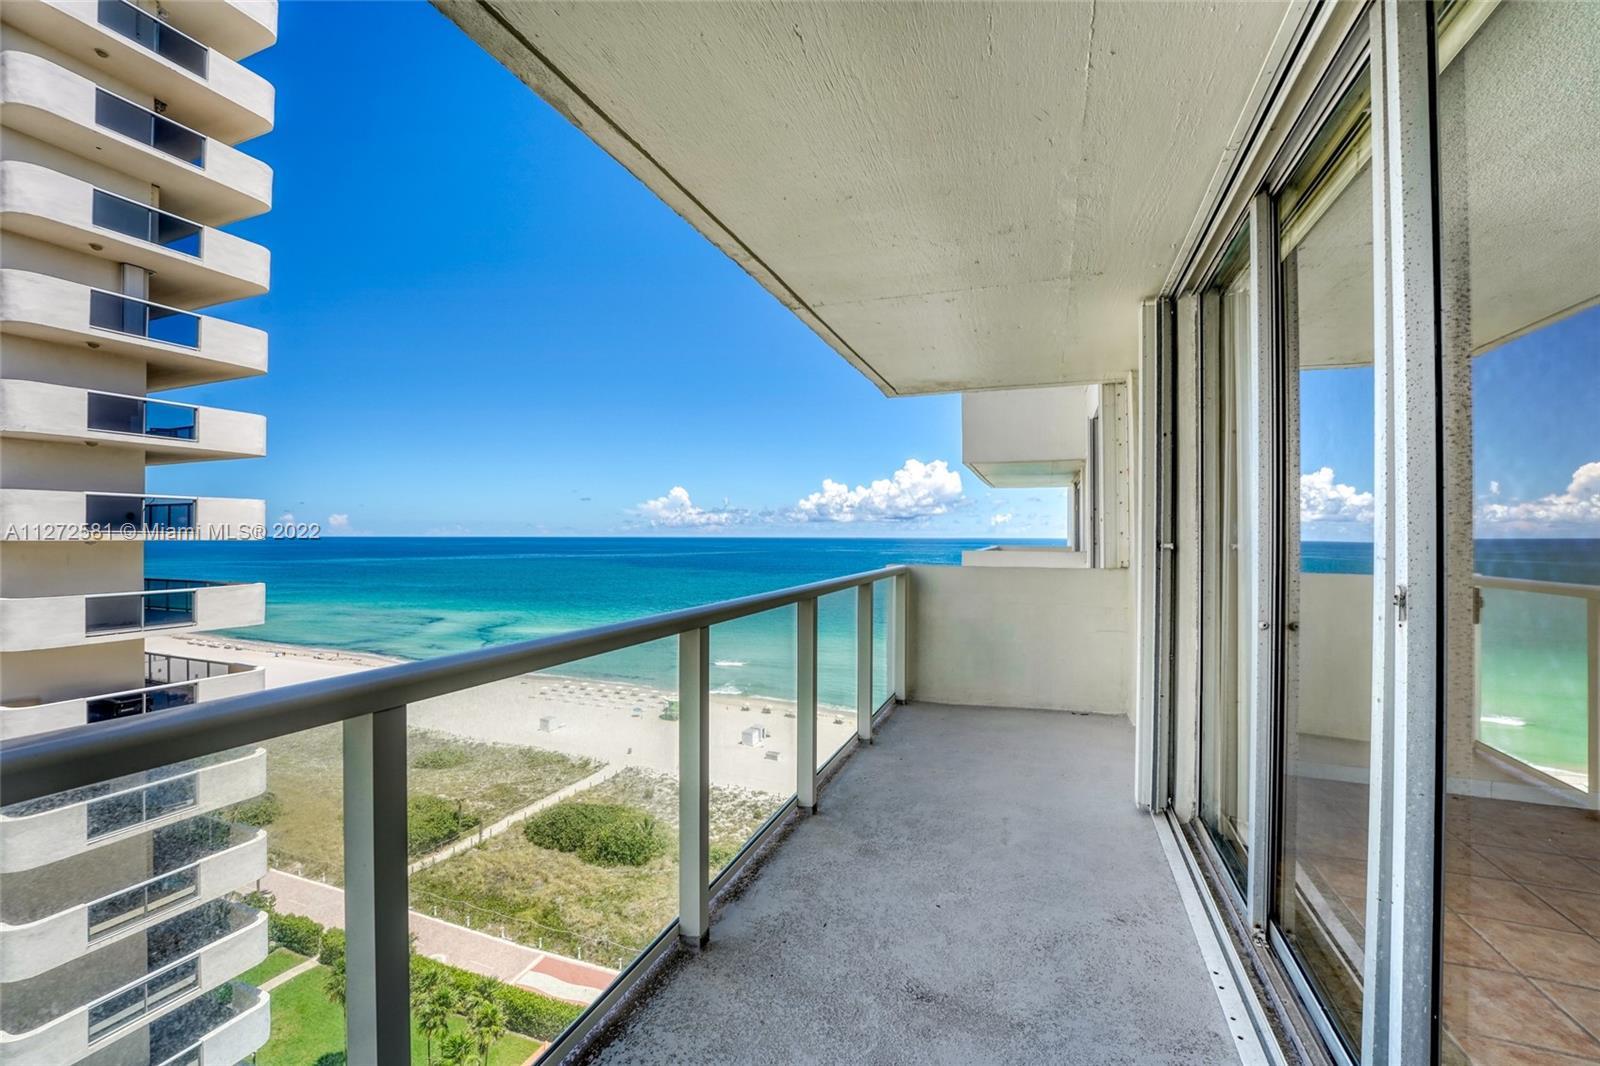 Enjoy the Amazing Ocean Views this unit has to offer. This 1 Bedroom 1.5 Baths is ready for occupanc